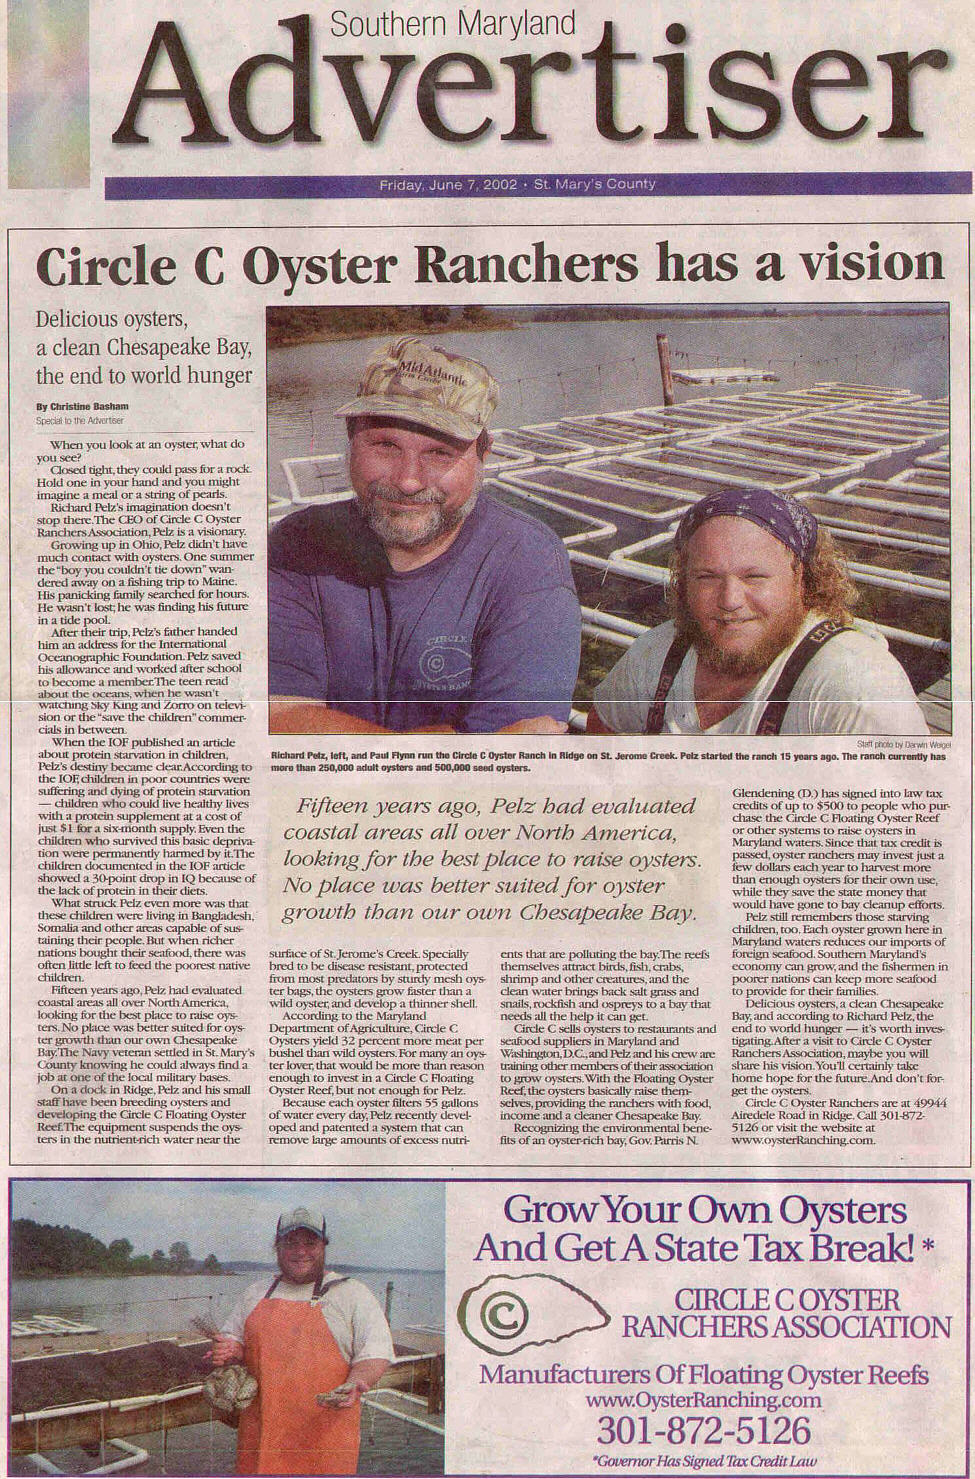 Southern Maryland Advertiser article.